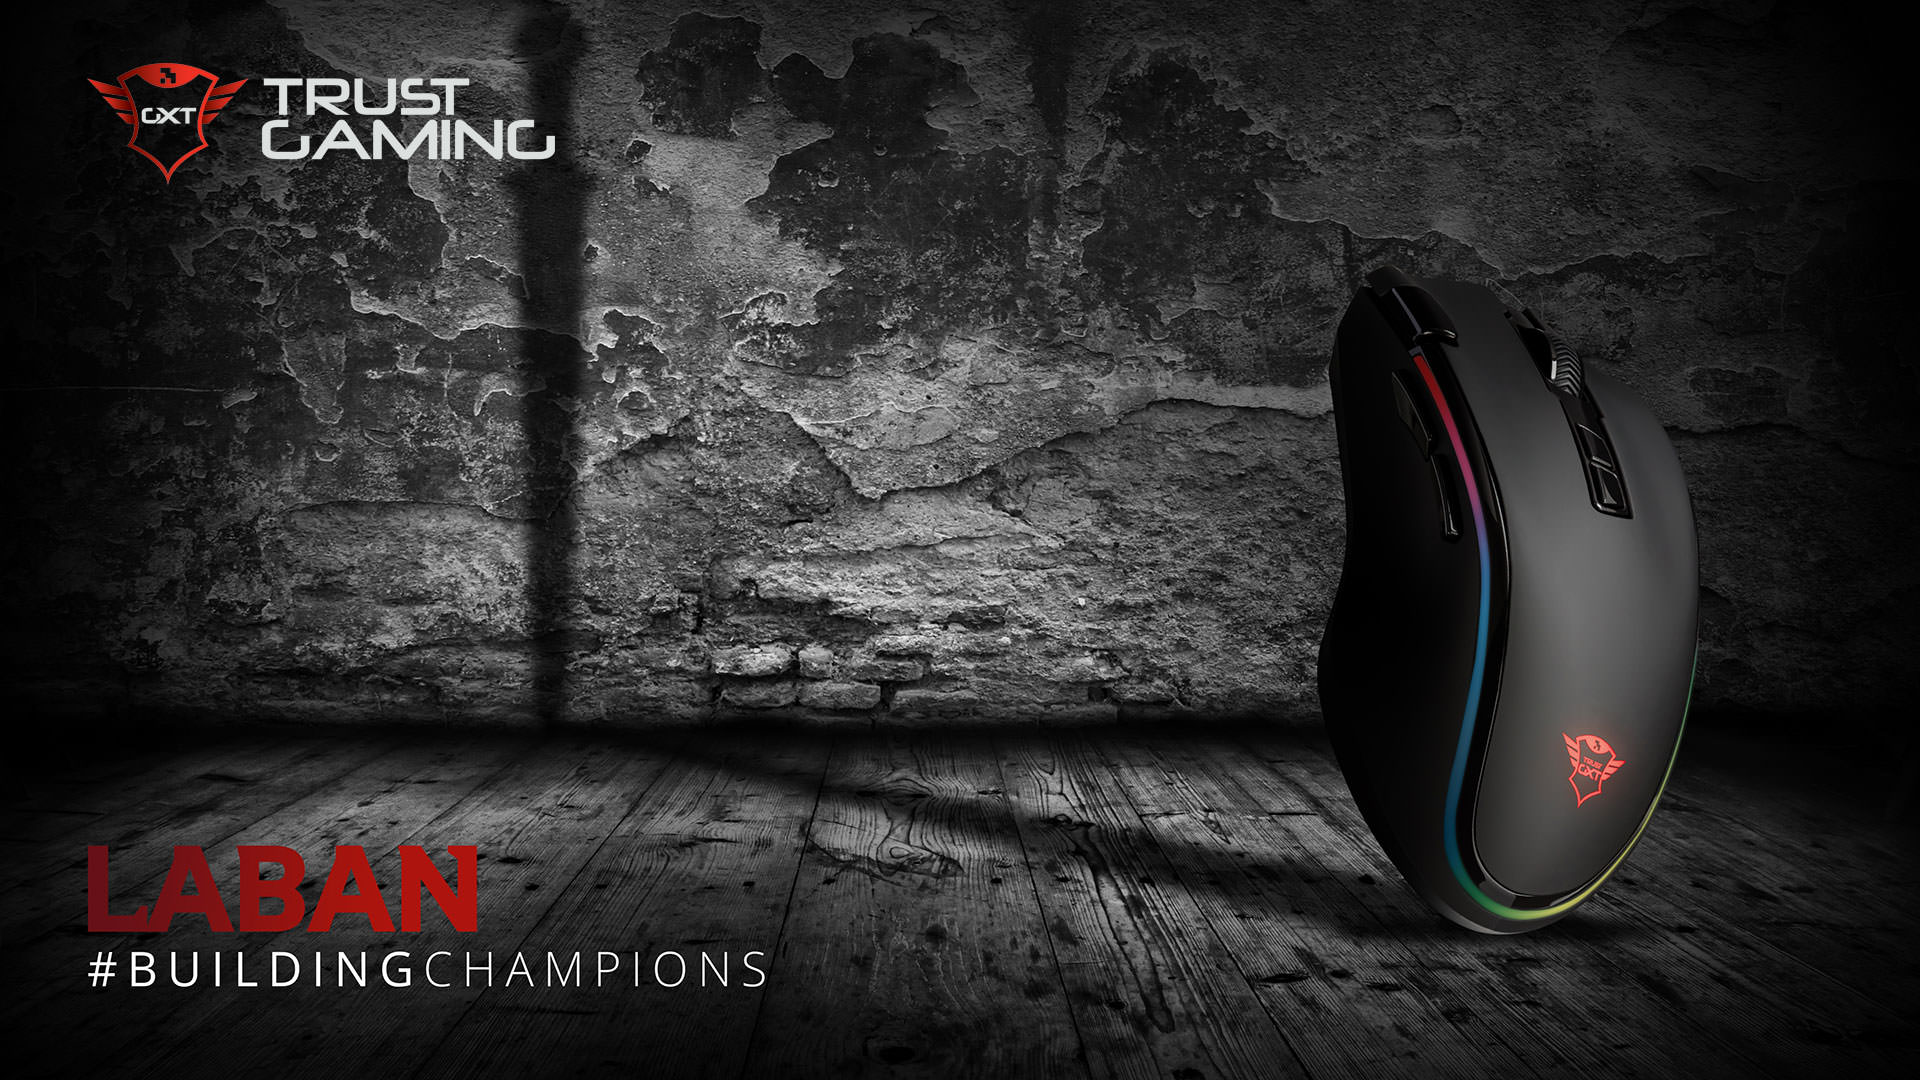 Trust Gaming GXT 188 Laban RGB Gaming Mouse Review